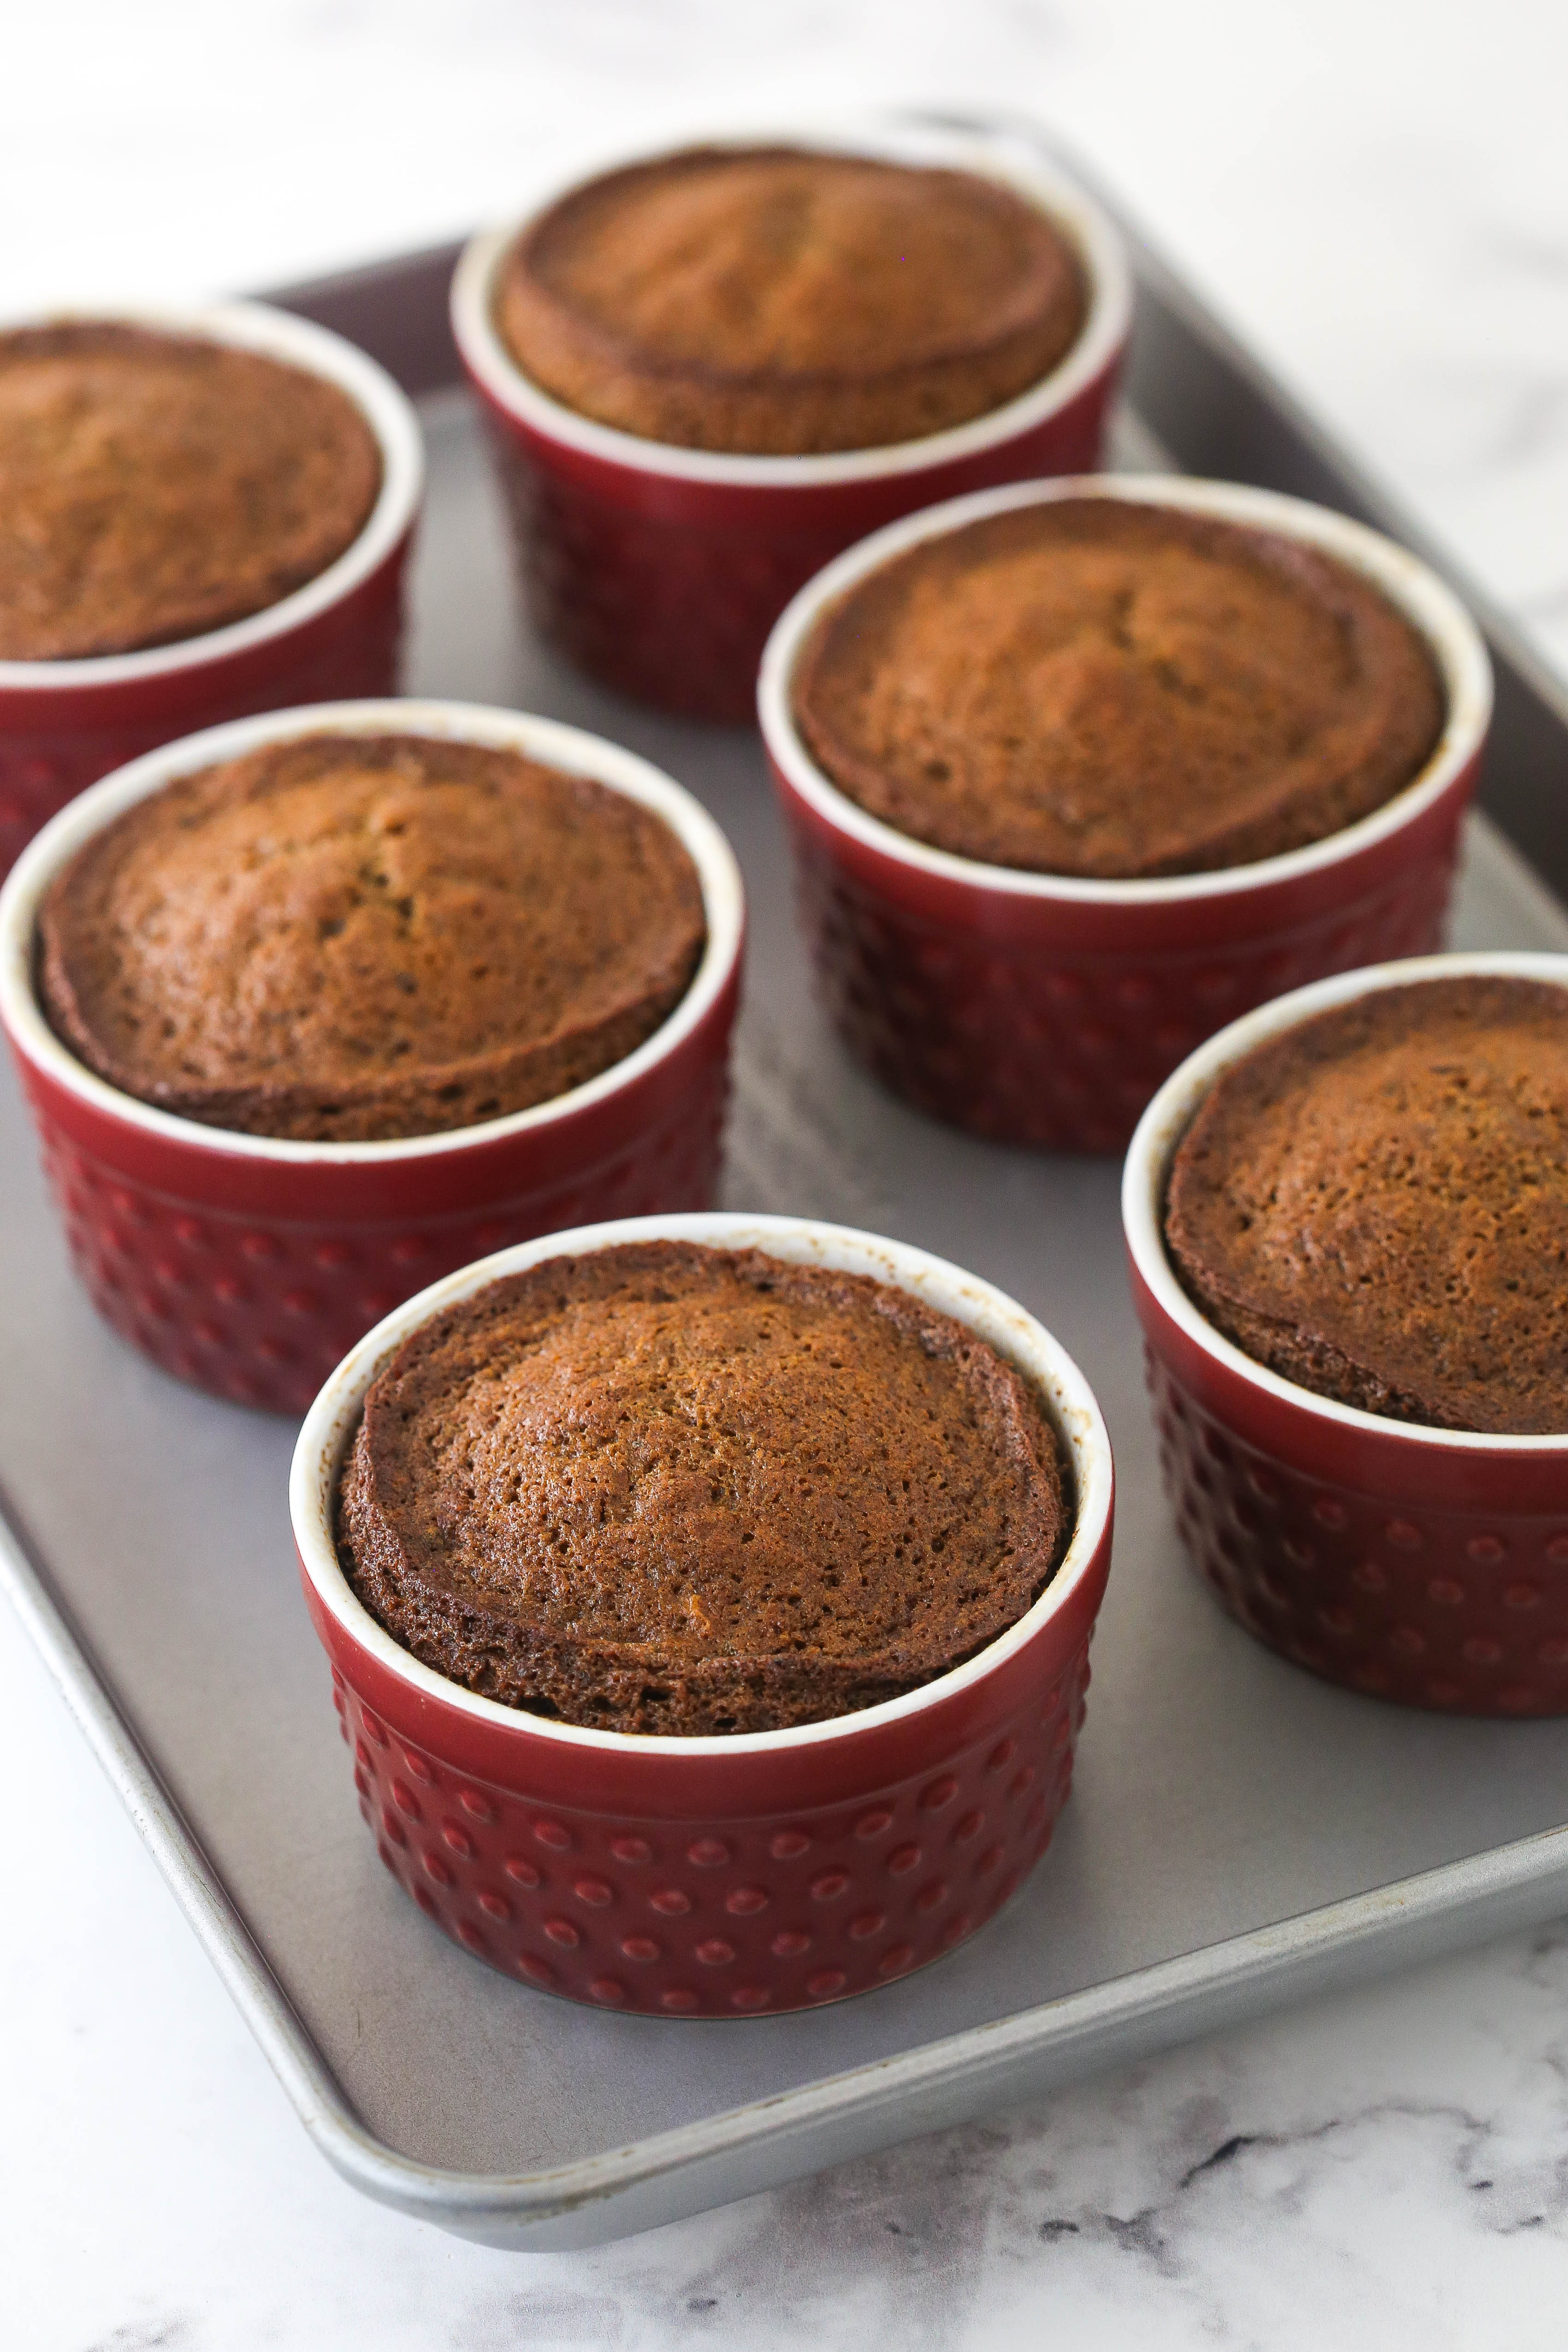 Baked sticky toffee puddings in red ramikins